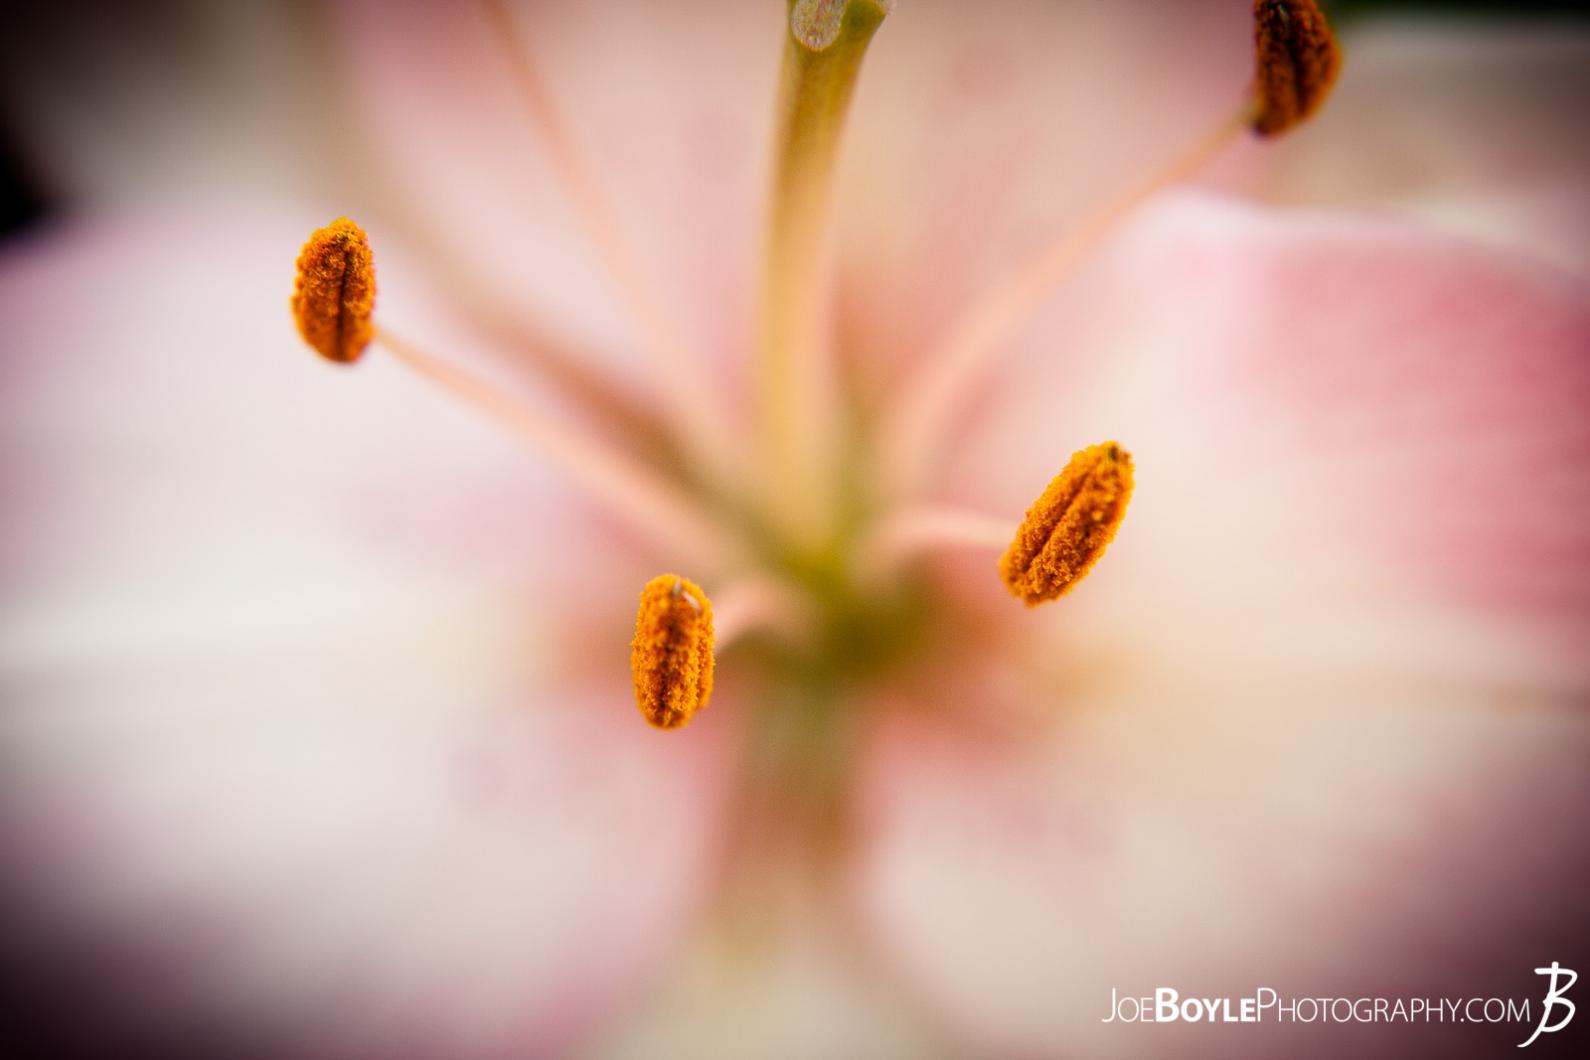 I took this image of these pink lilies on one, sunny afternoon. I walked past these flowers for a few days before finally remembering to bring my camera with me!